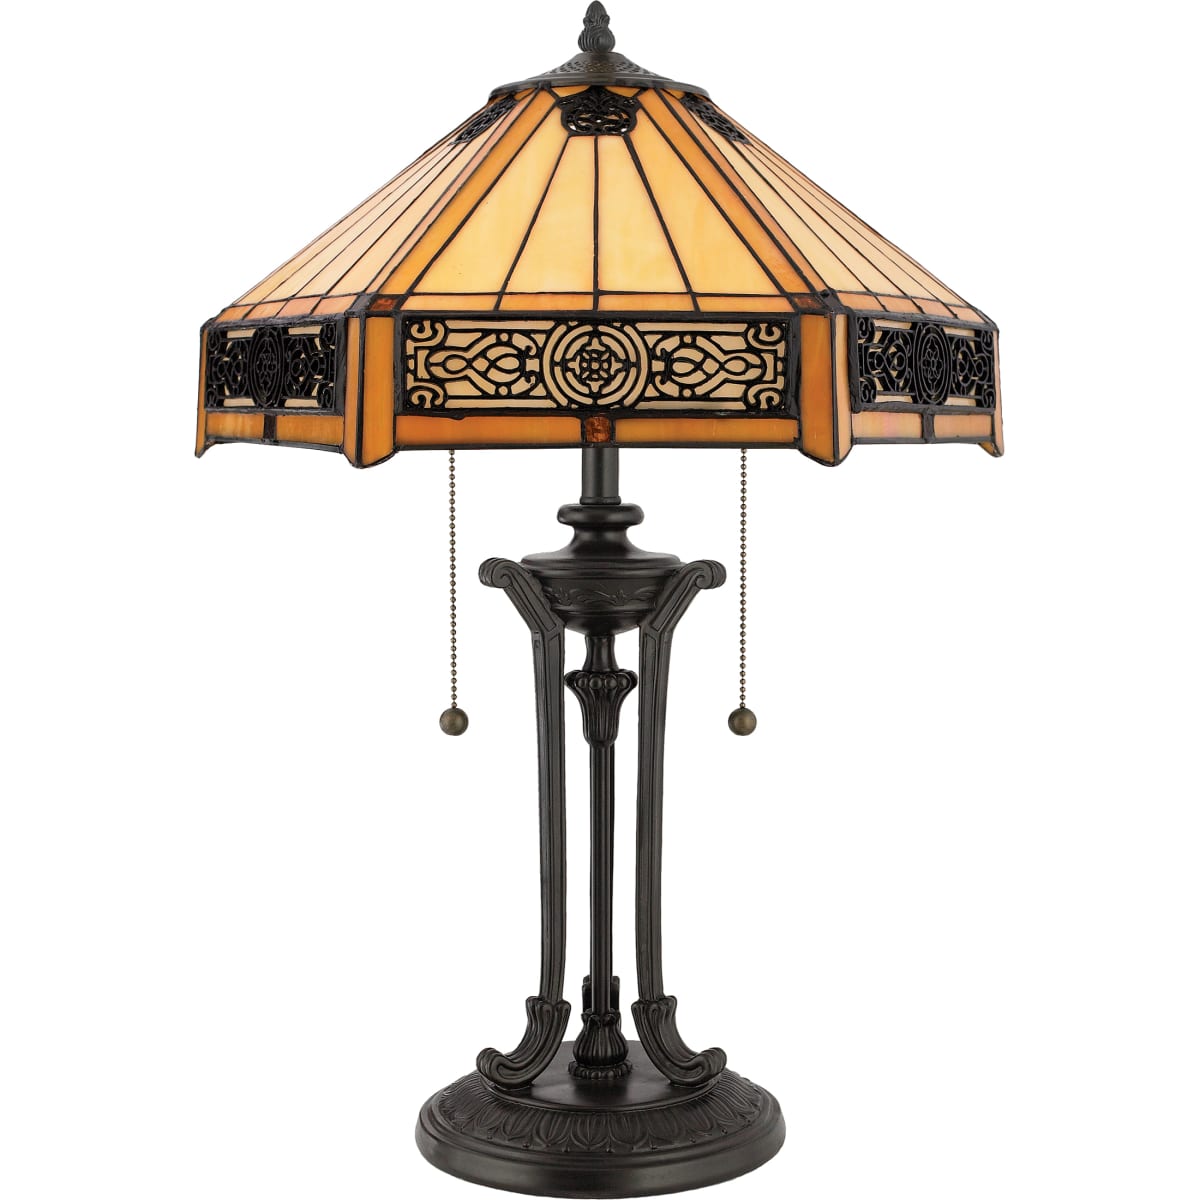 Quoizel Tf6669vb 2 Light 23, Quoizel Stained Glass Table Lamps